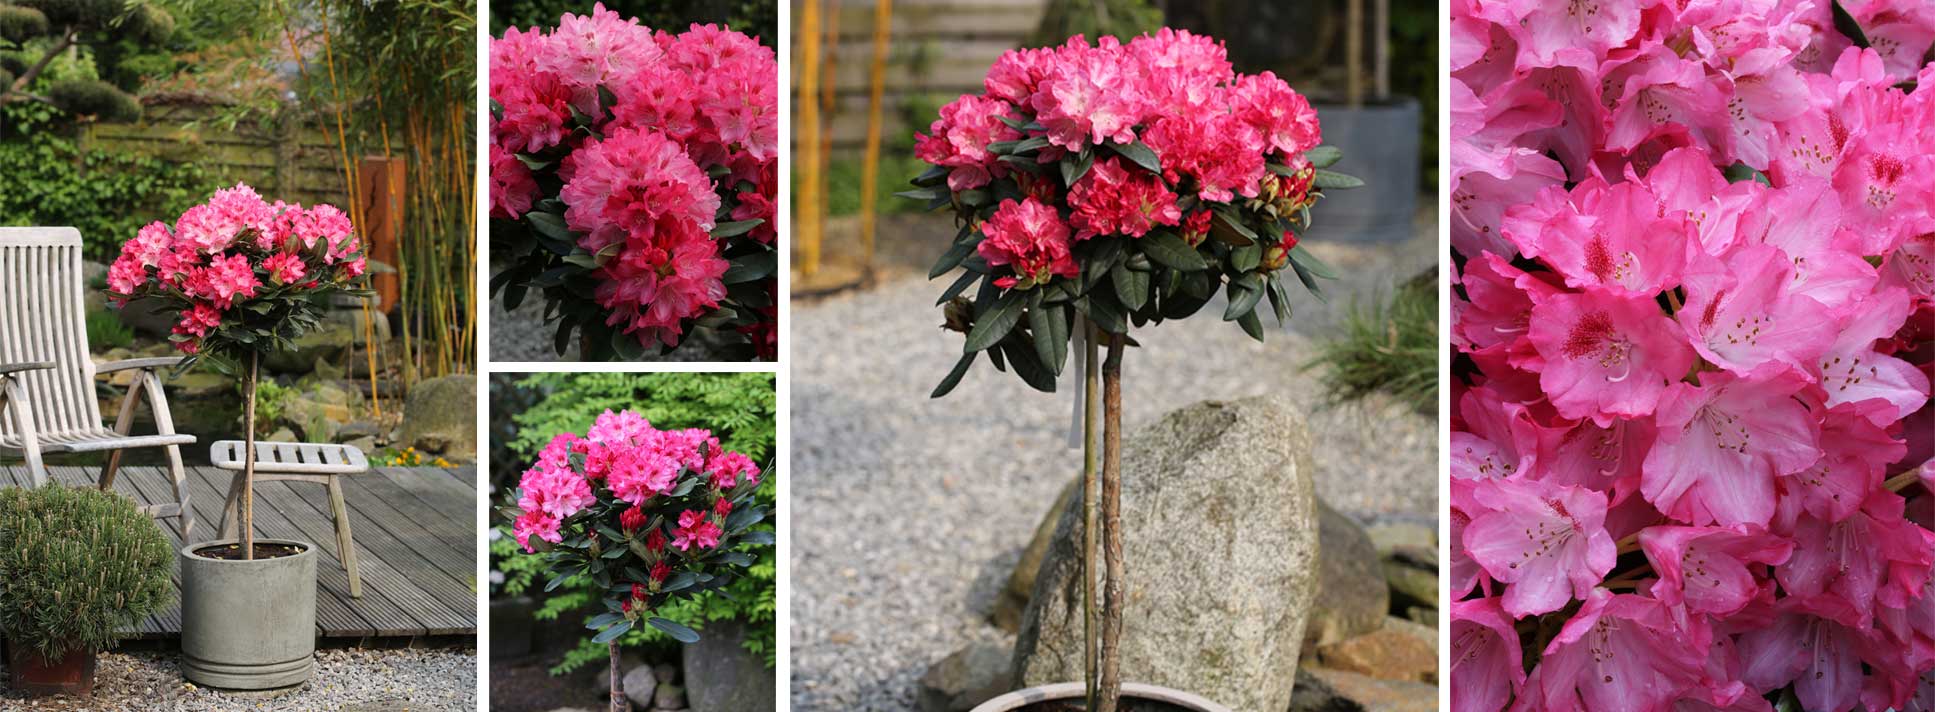 Rhododendron Sneezy